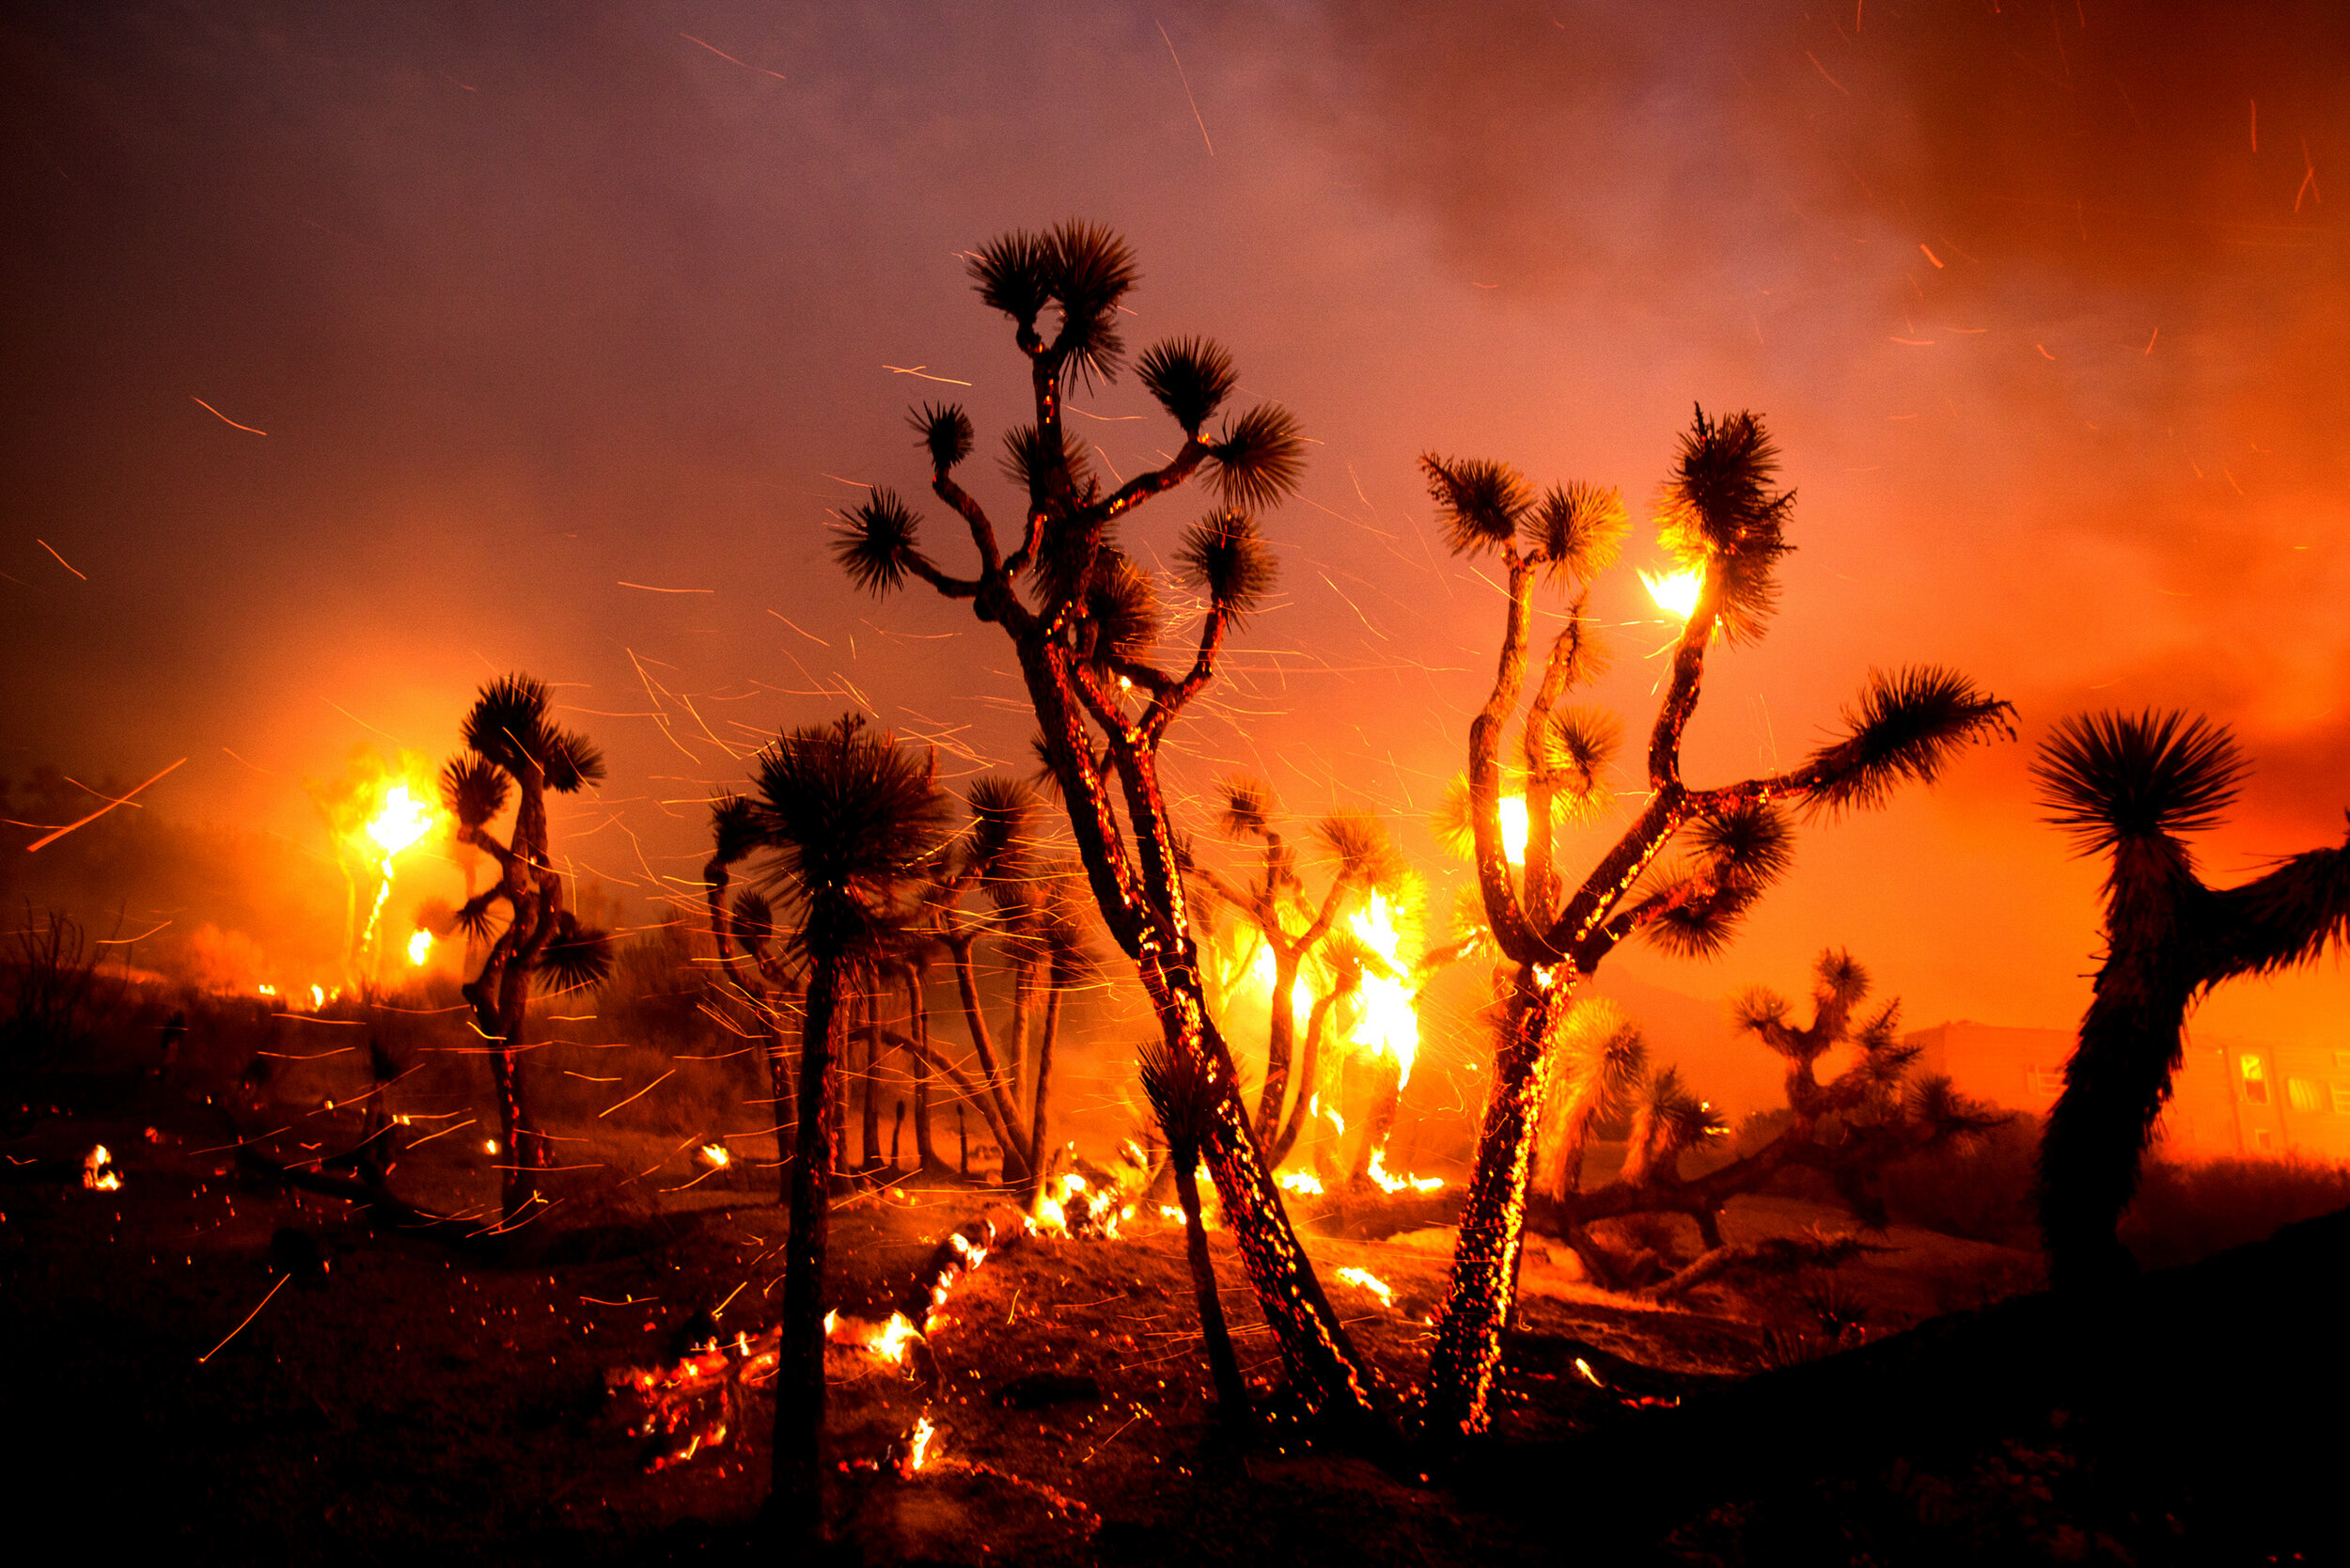  The wind whips embers from the Joshua trees burning in the Bobcat Fire in Juniper Hills, Calif., Friday, Sept. 18, 2020. The 2020 California wildfire season was characterized by a record-setting year of wildfires that burned across the state of Cali